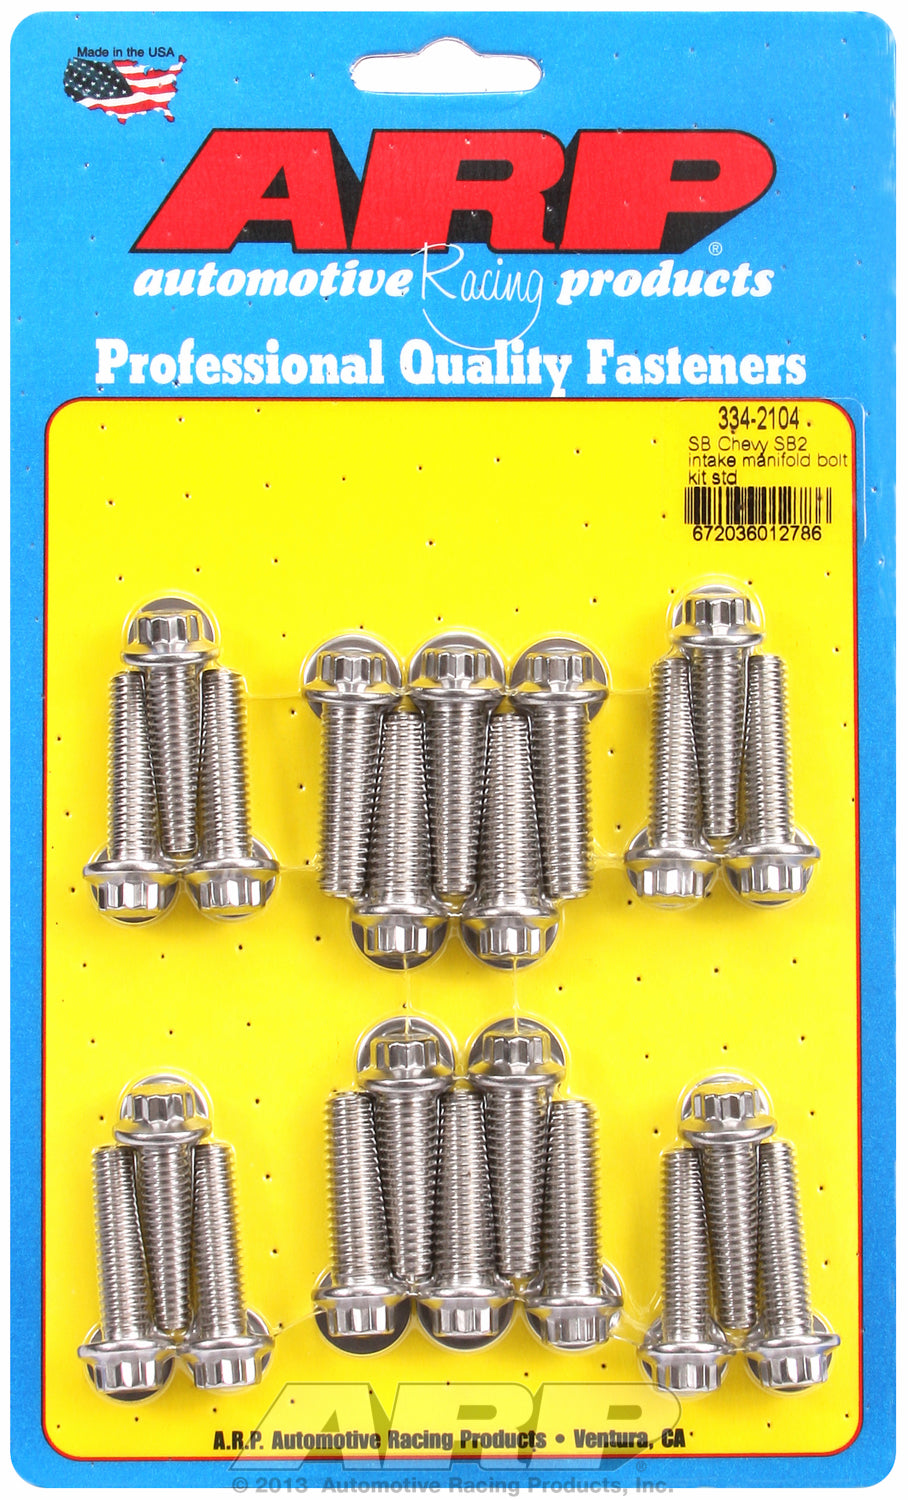 12-Pt Head Stainless Intake Manifold Bolts for Chevrolet SB 2, standard deck